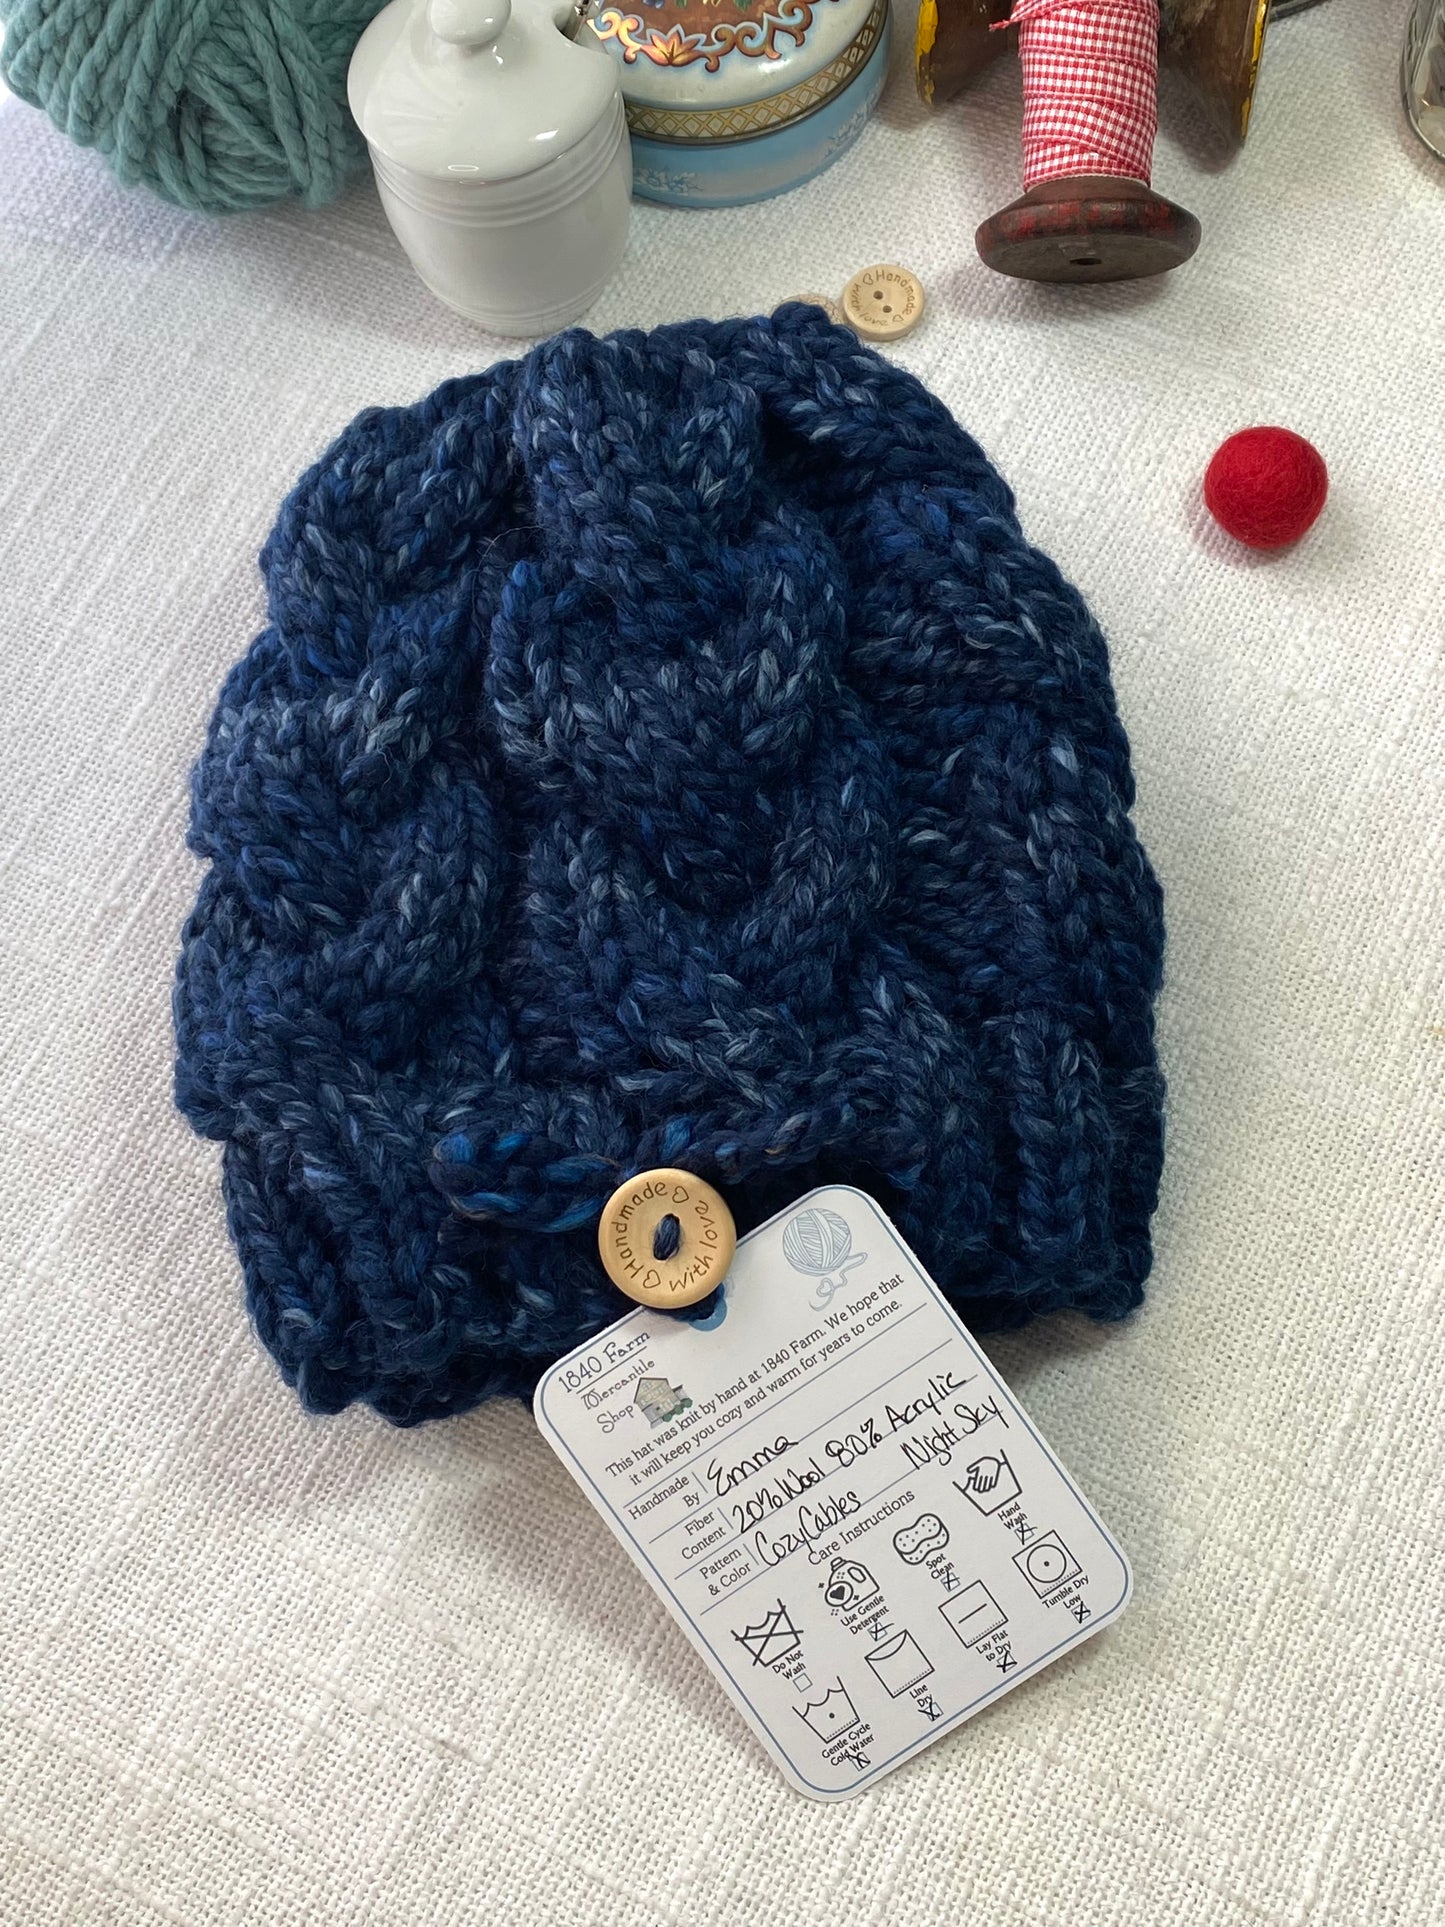 Cozy Cables Hat - Wool Blend Fiber in Night Sky